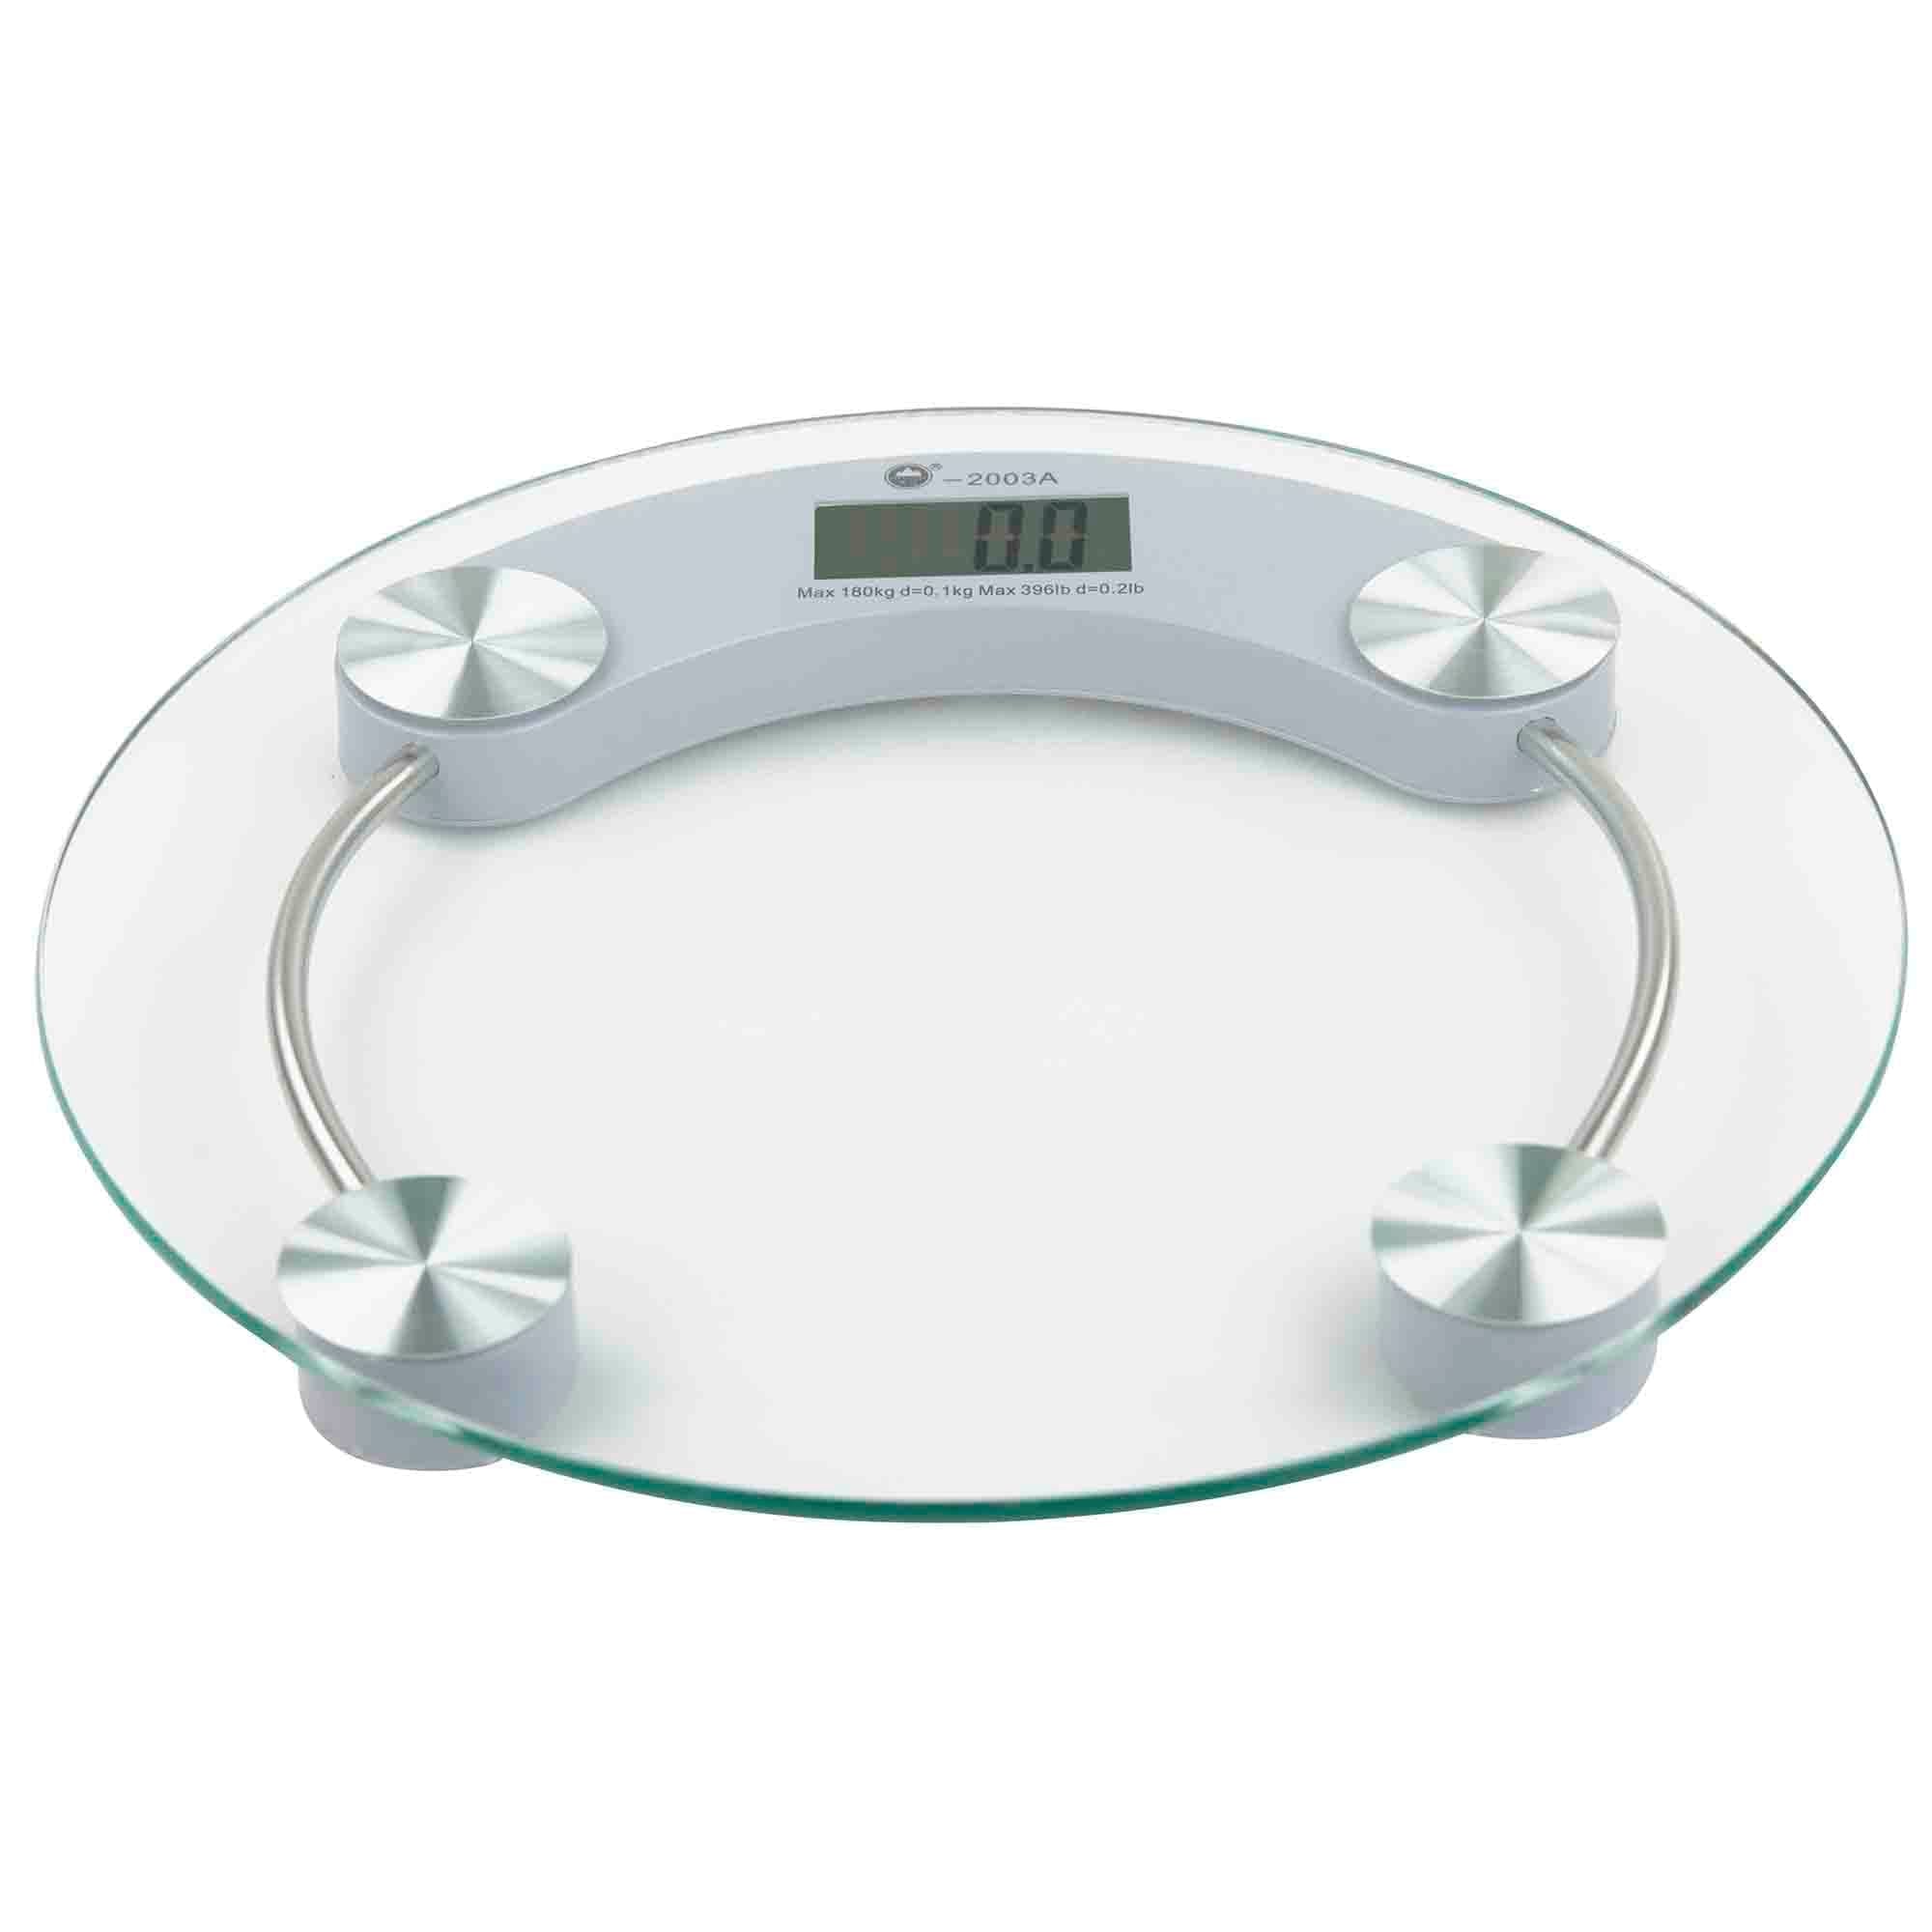 Home Basics Round Glass Bathroom Scale $10.00 EACH, CASE PACK OF 8